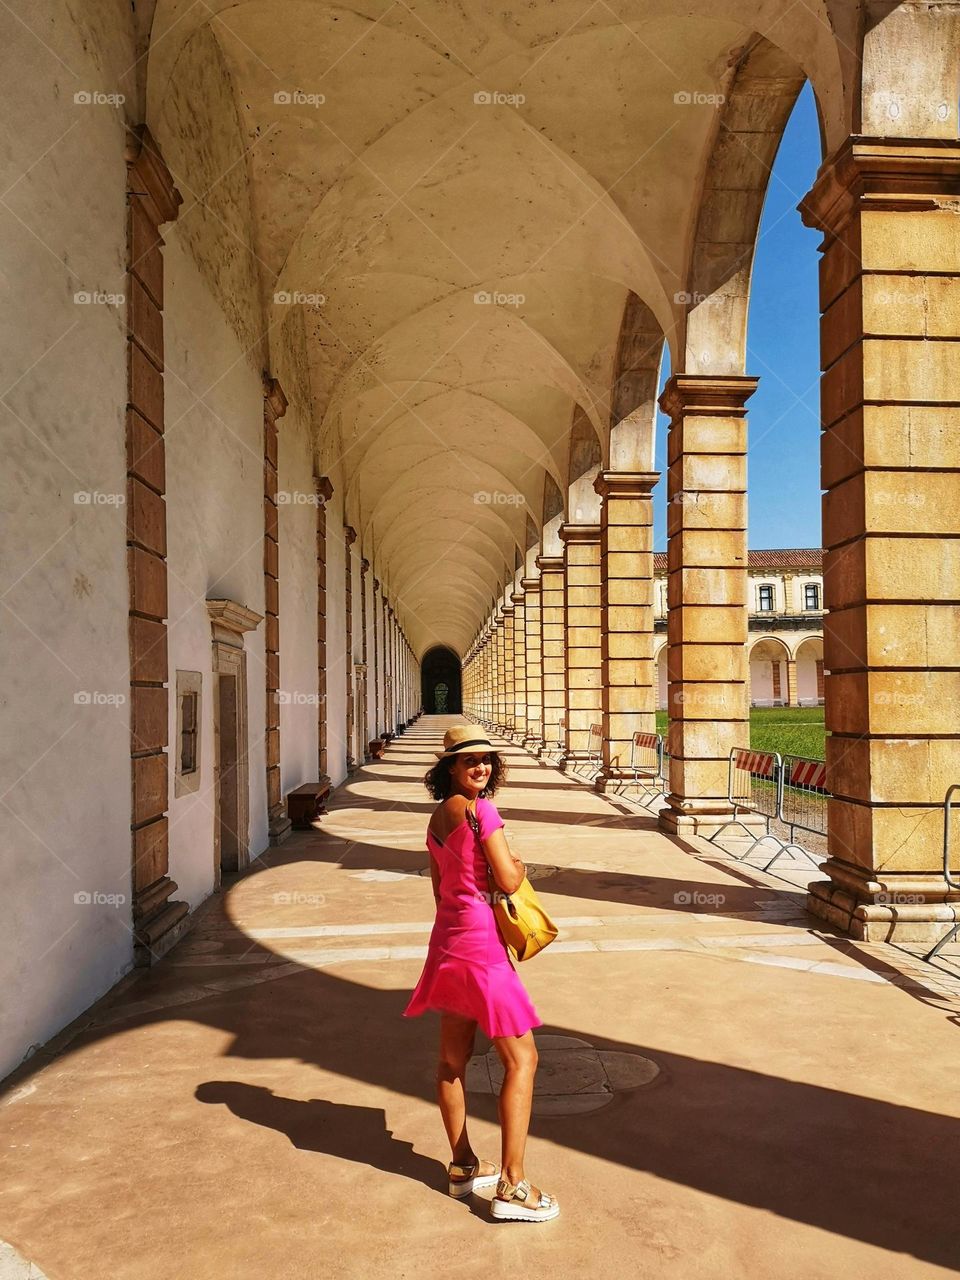 smiling woman in fuchsia dress under the colonnade of an ancient palace